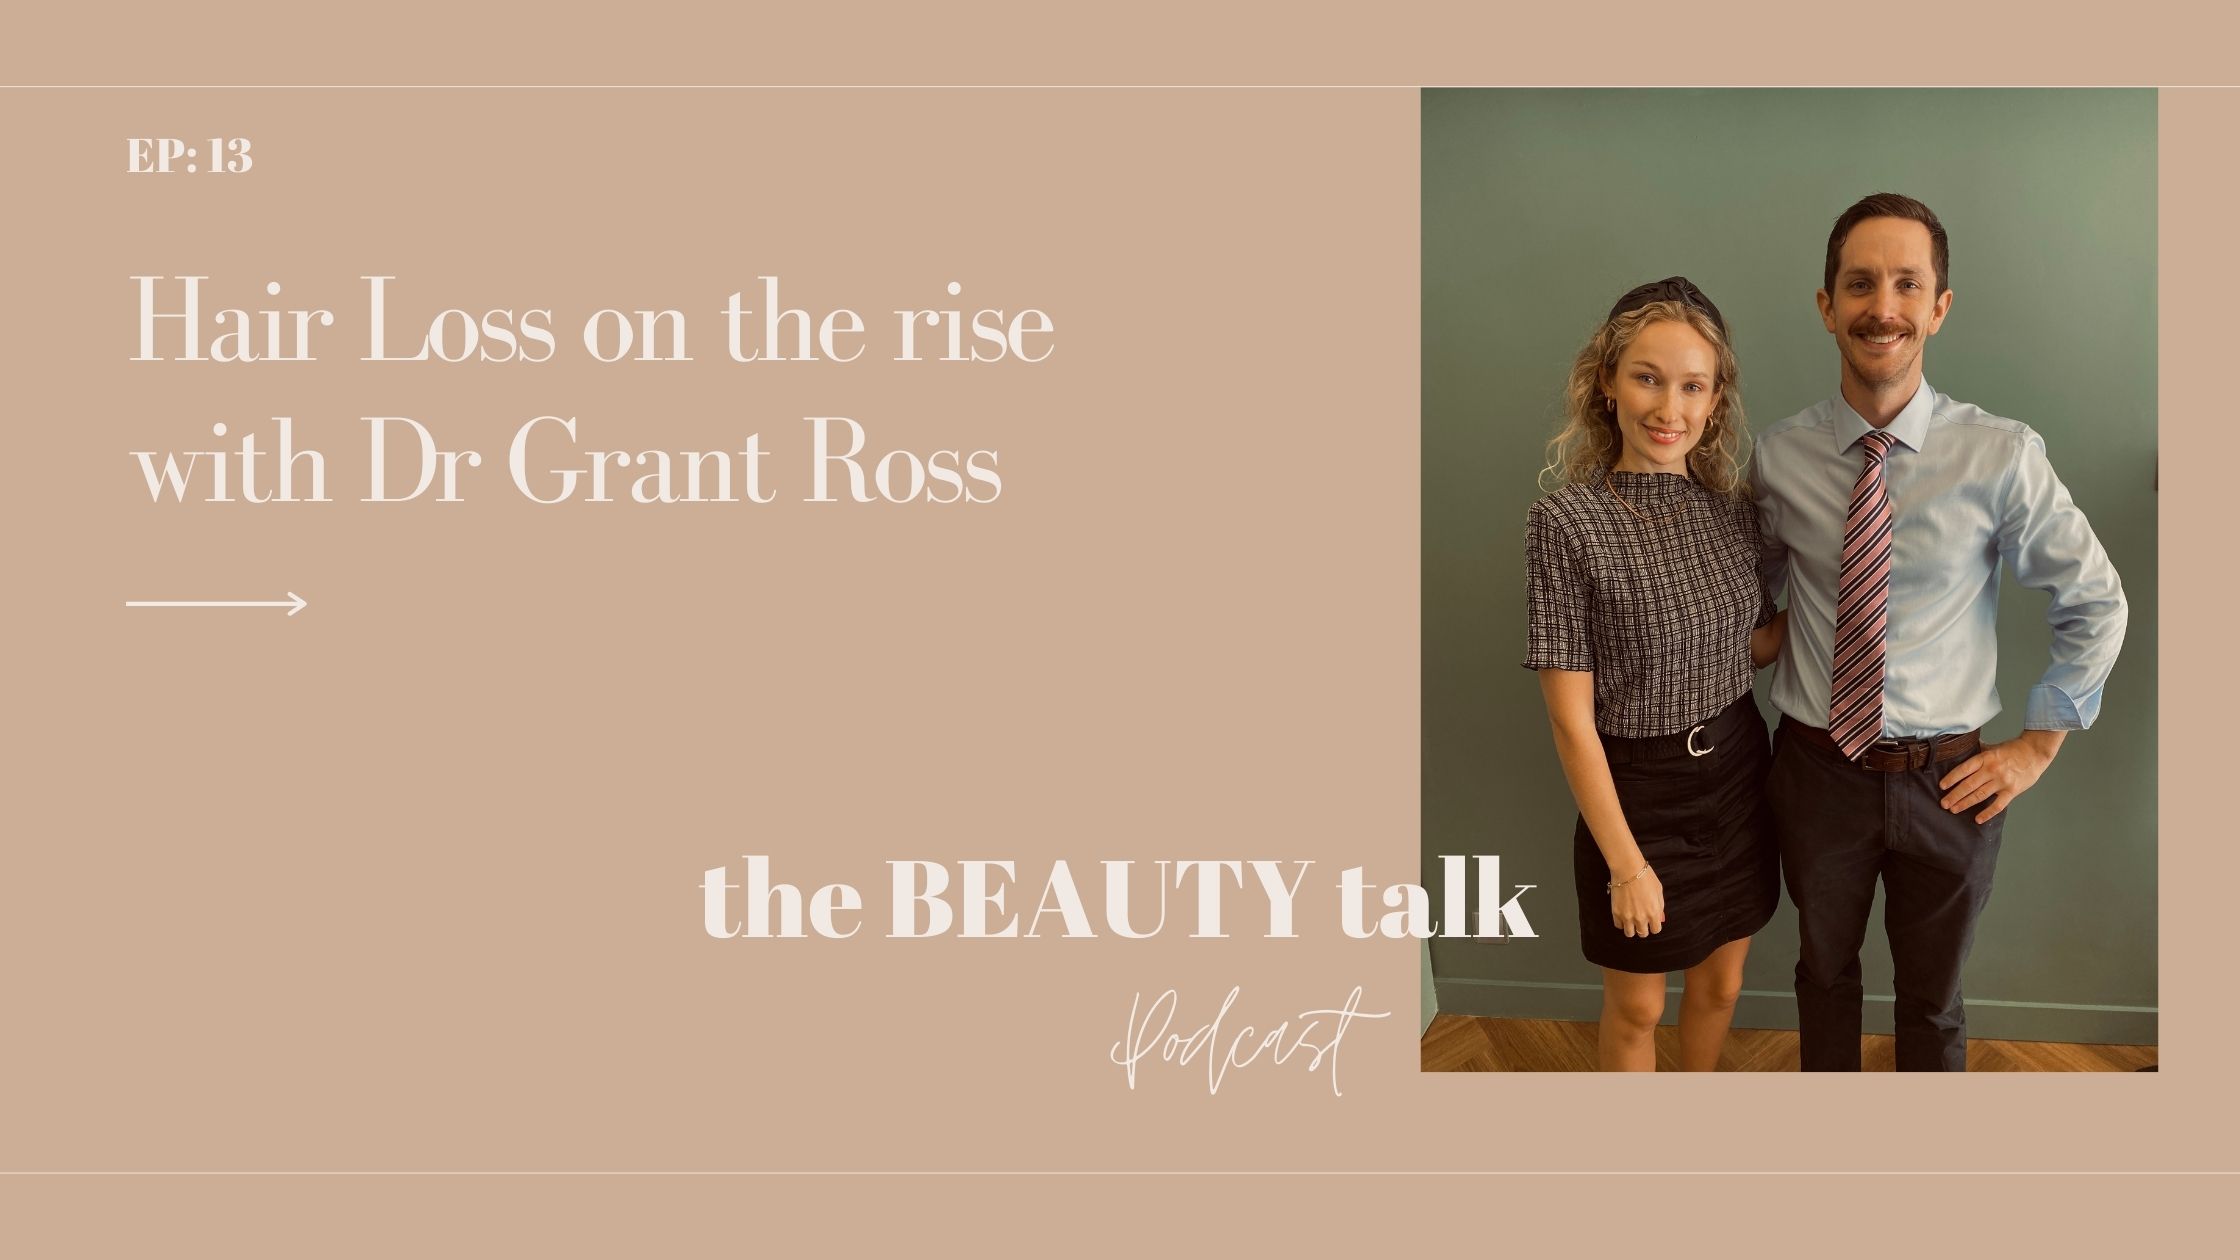 Hair Loss on the rise with Dr Grant Ross